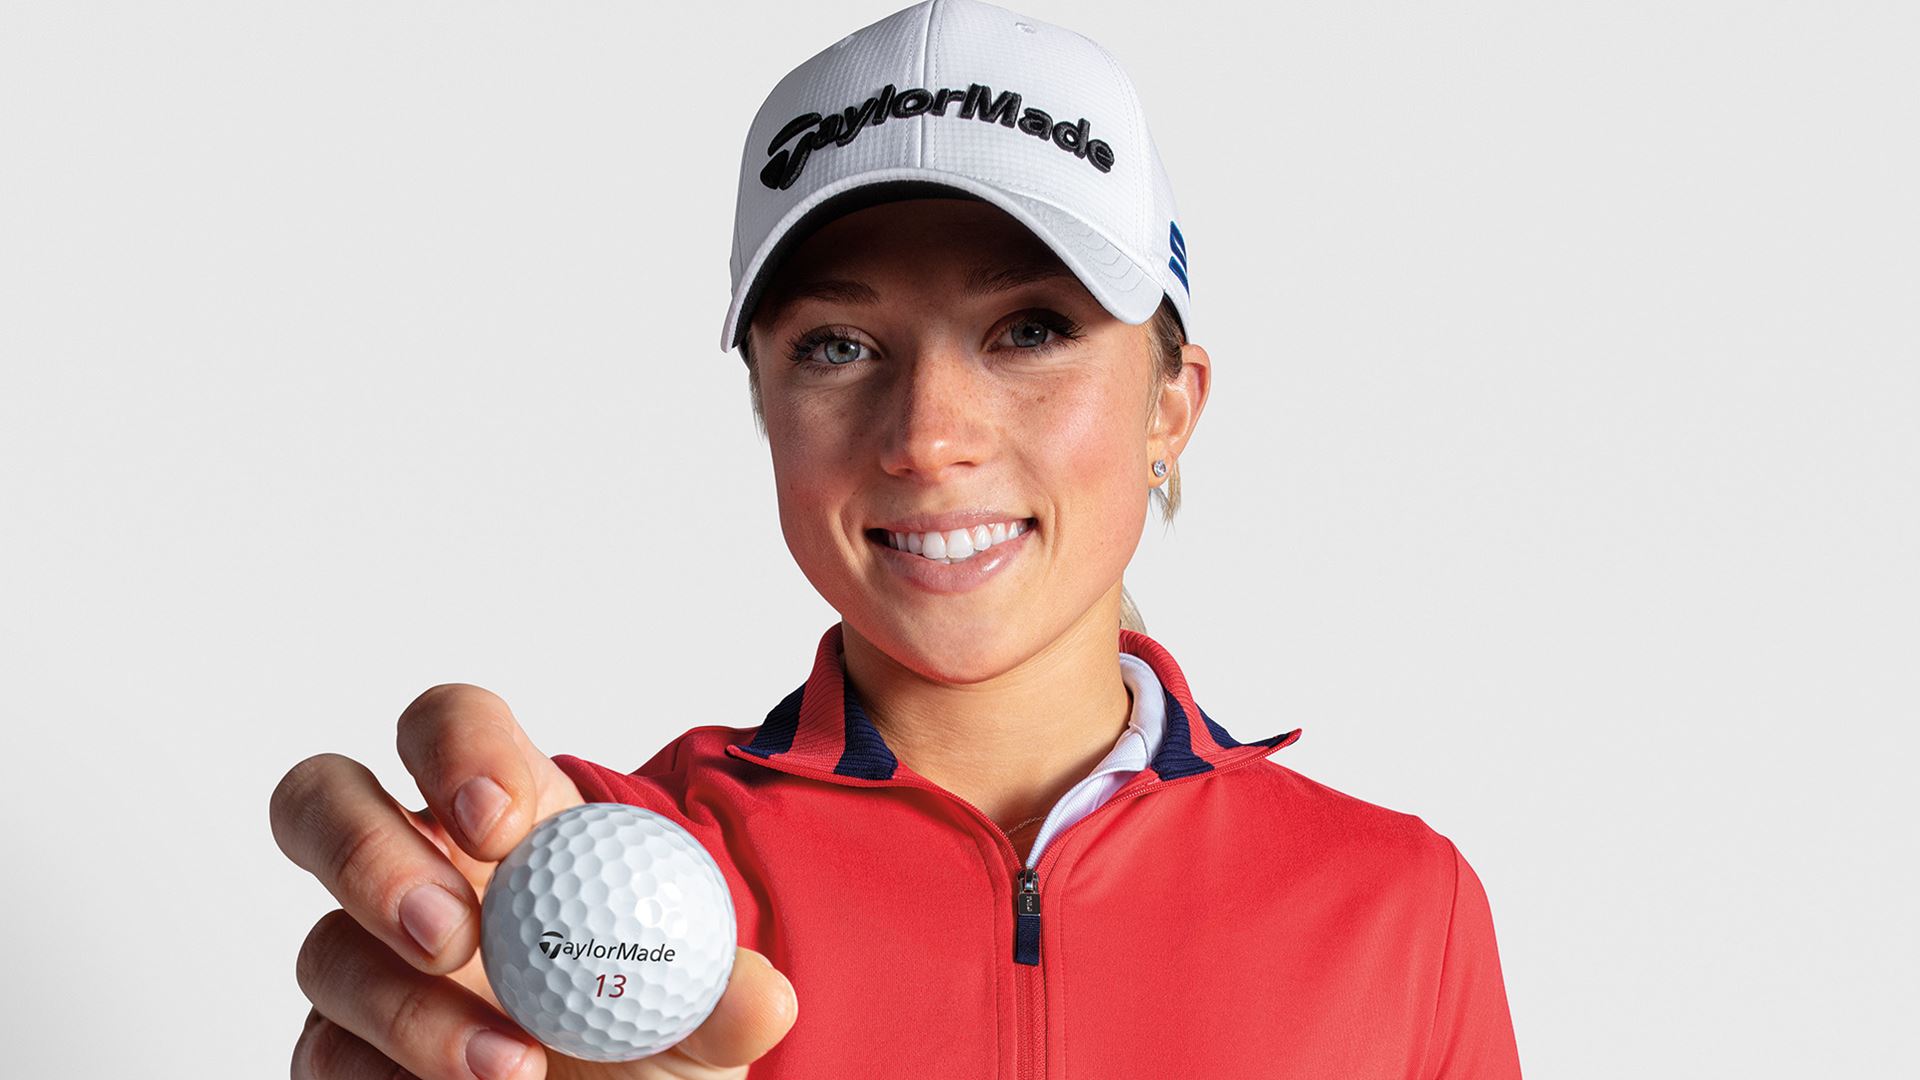 Sierra Brooks Joins Team TaylorMade After Signing Multi-Year Agreement To Plays TaylorMade Clubs and Ball